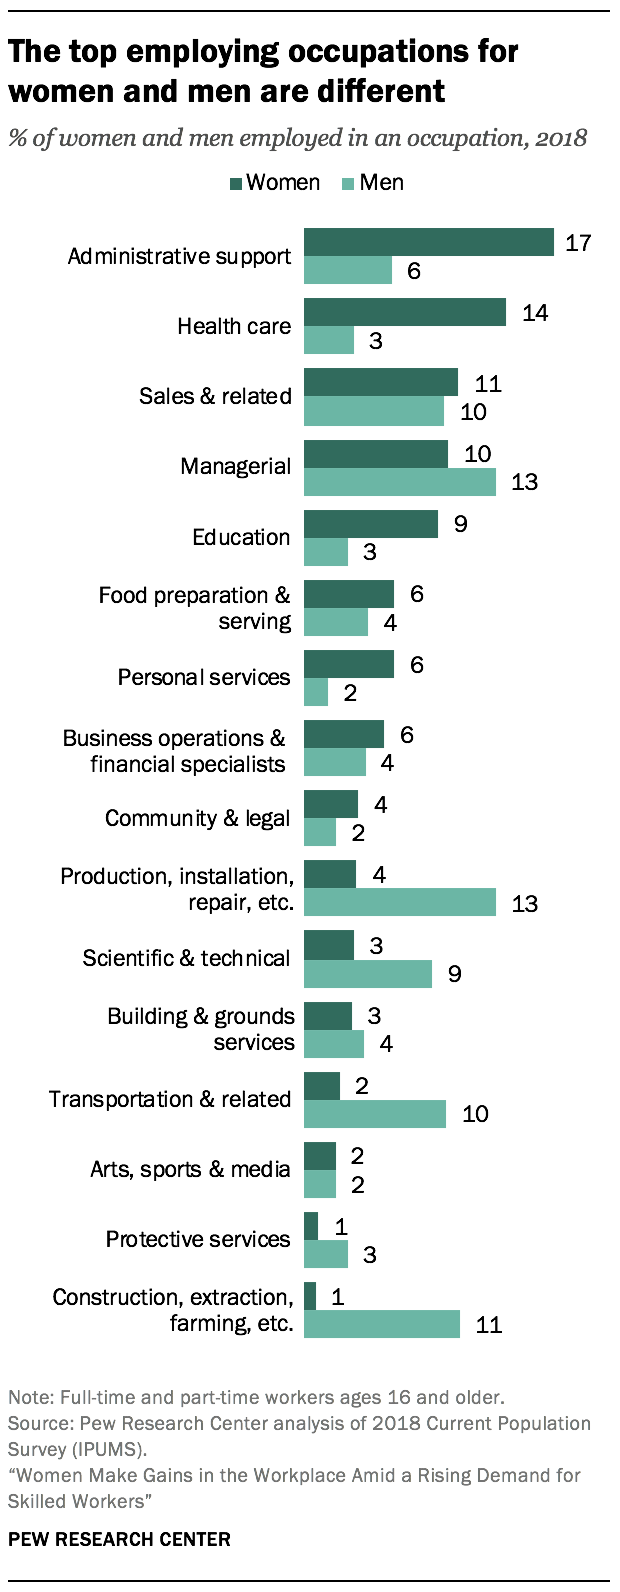 The top employing occupations for women and men are different